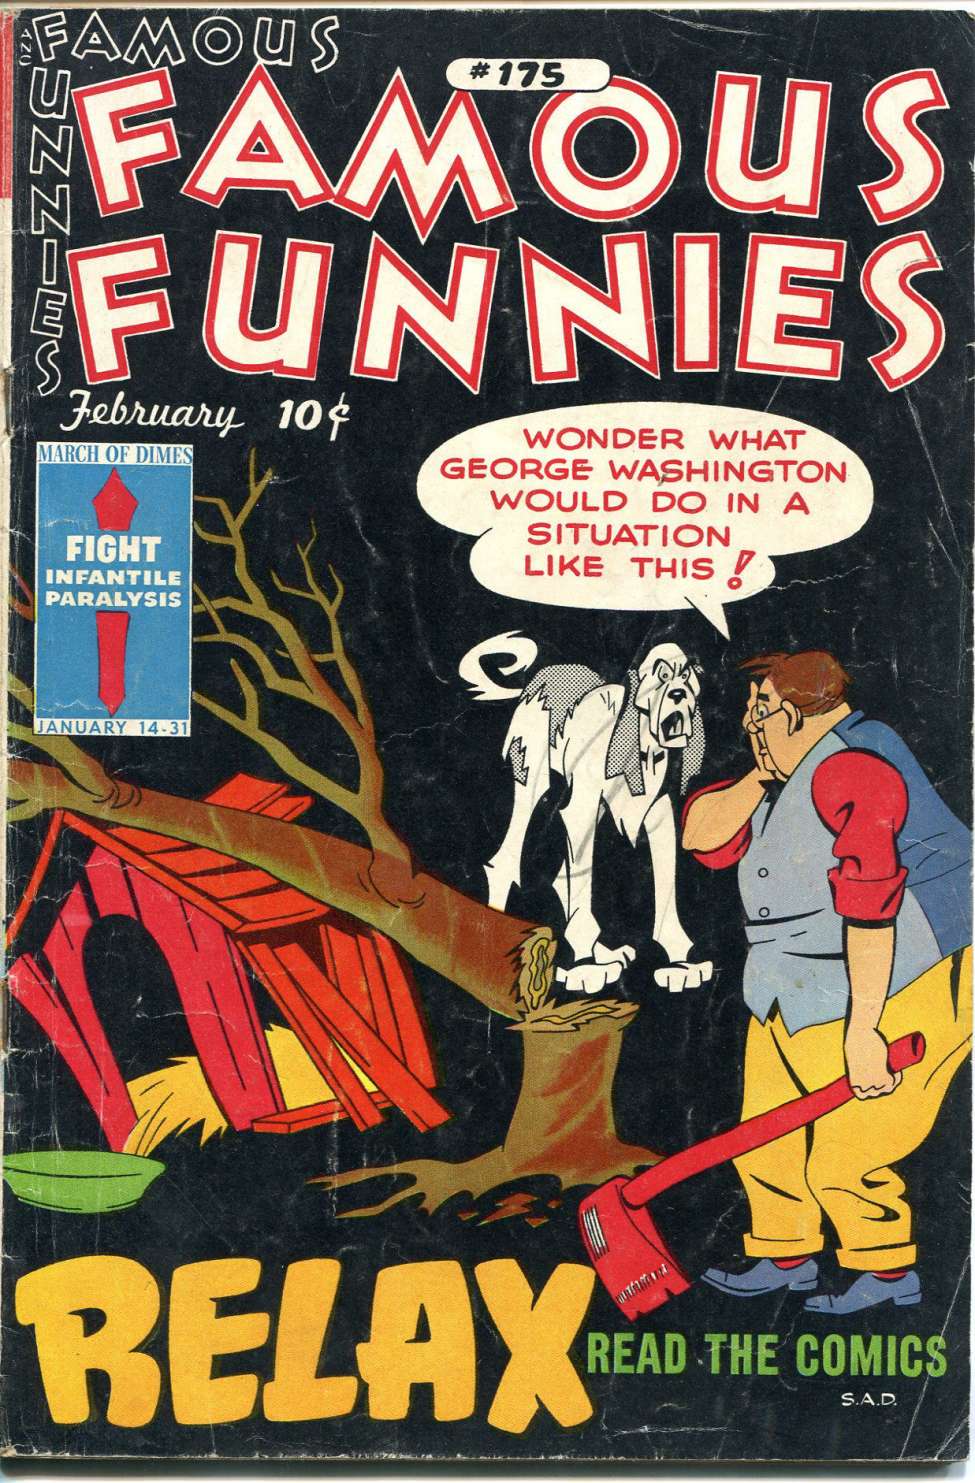 Comic Book Cover For Famous Funnies 175